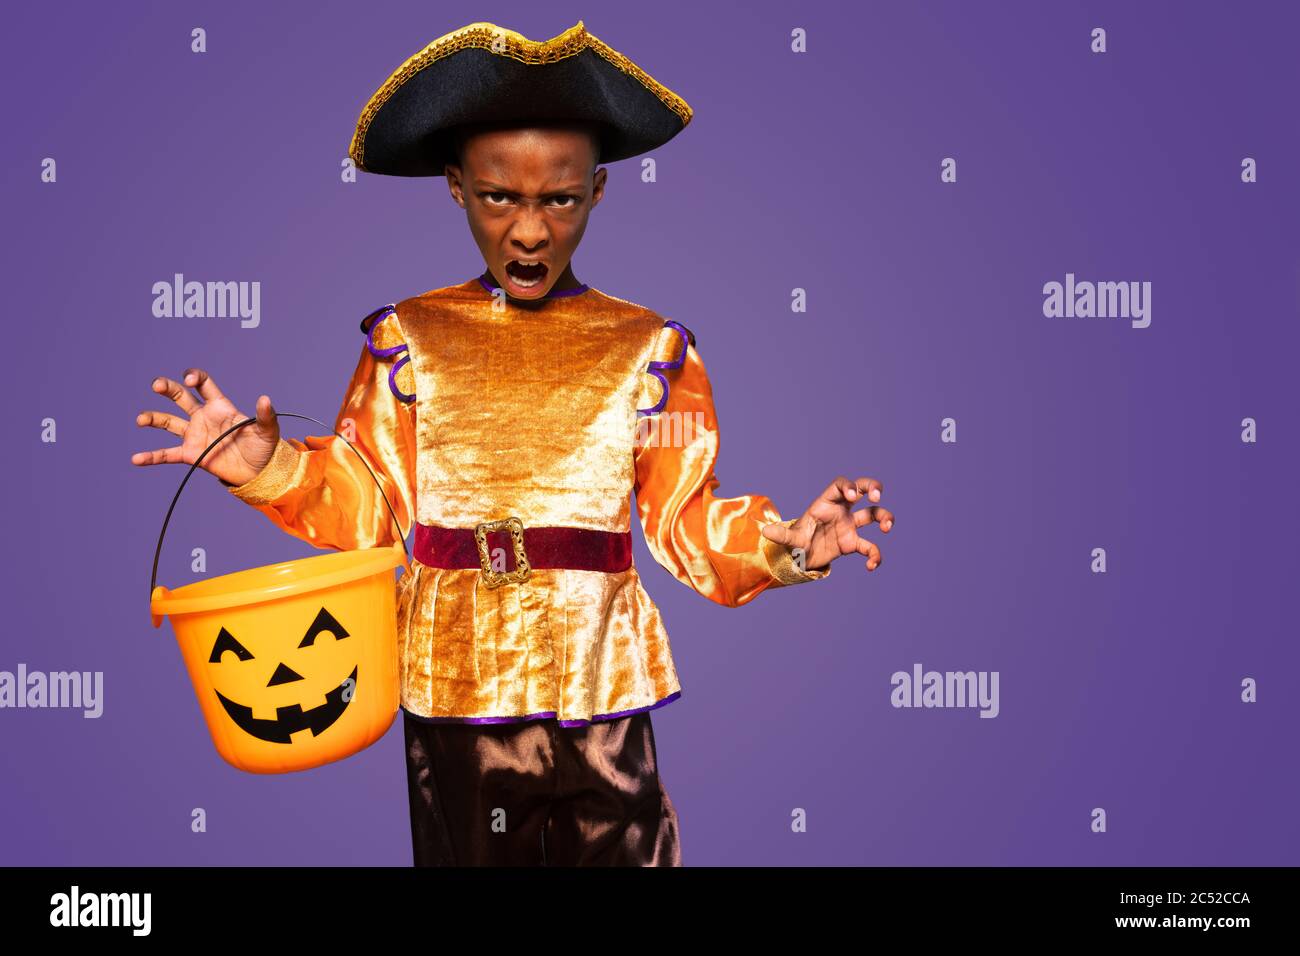 Little boy in Halloween costume show spooky gestures standing over purple background holding scary candy bucket Stock Photo